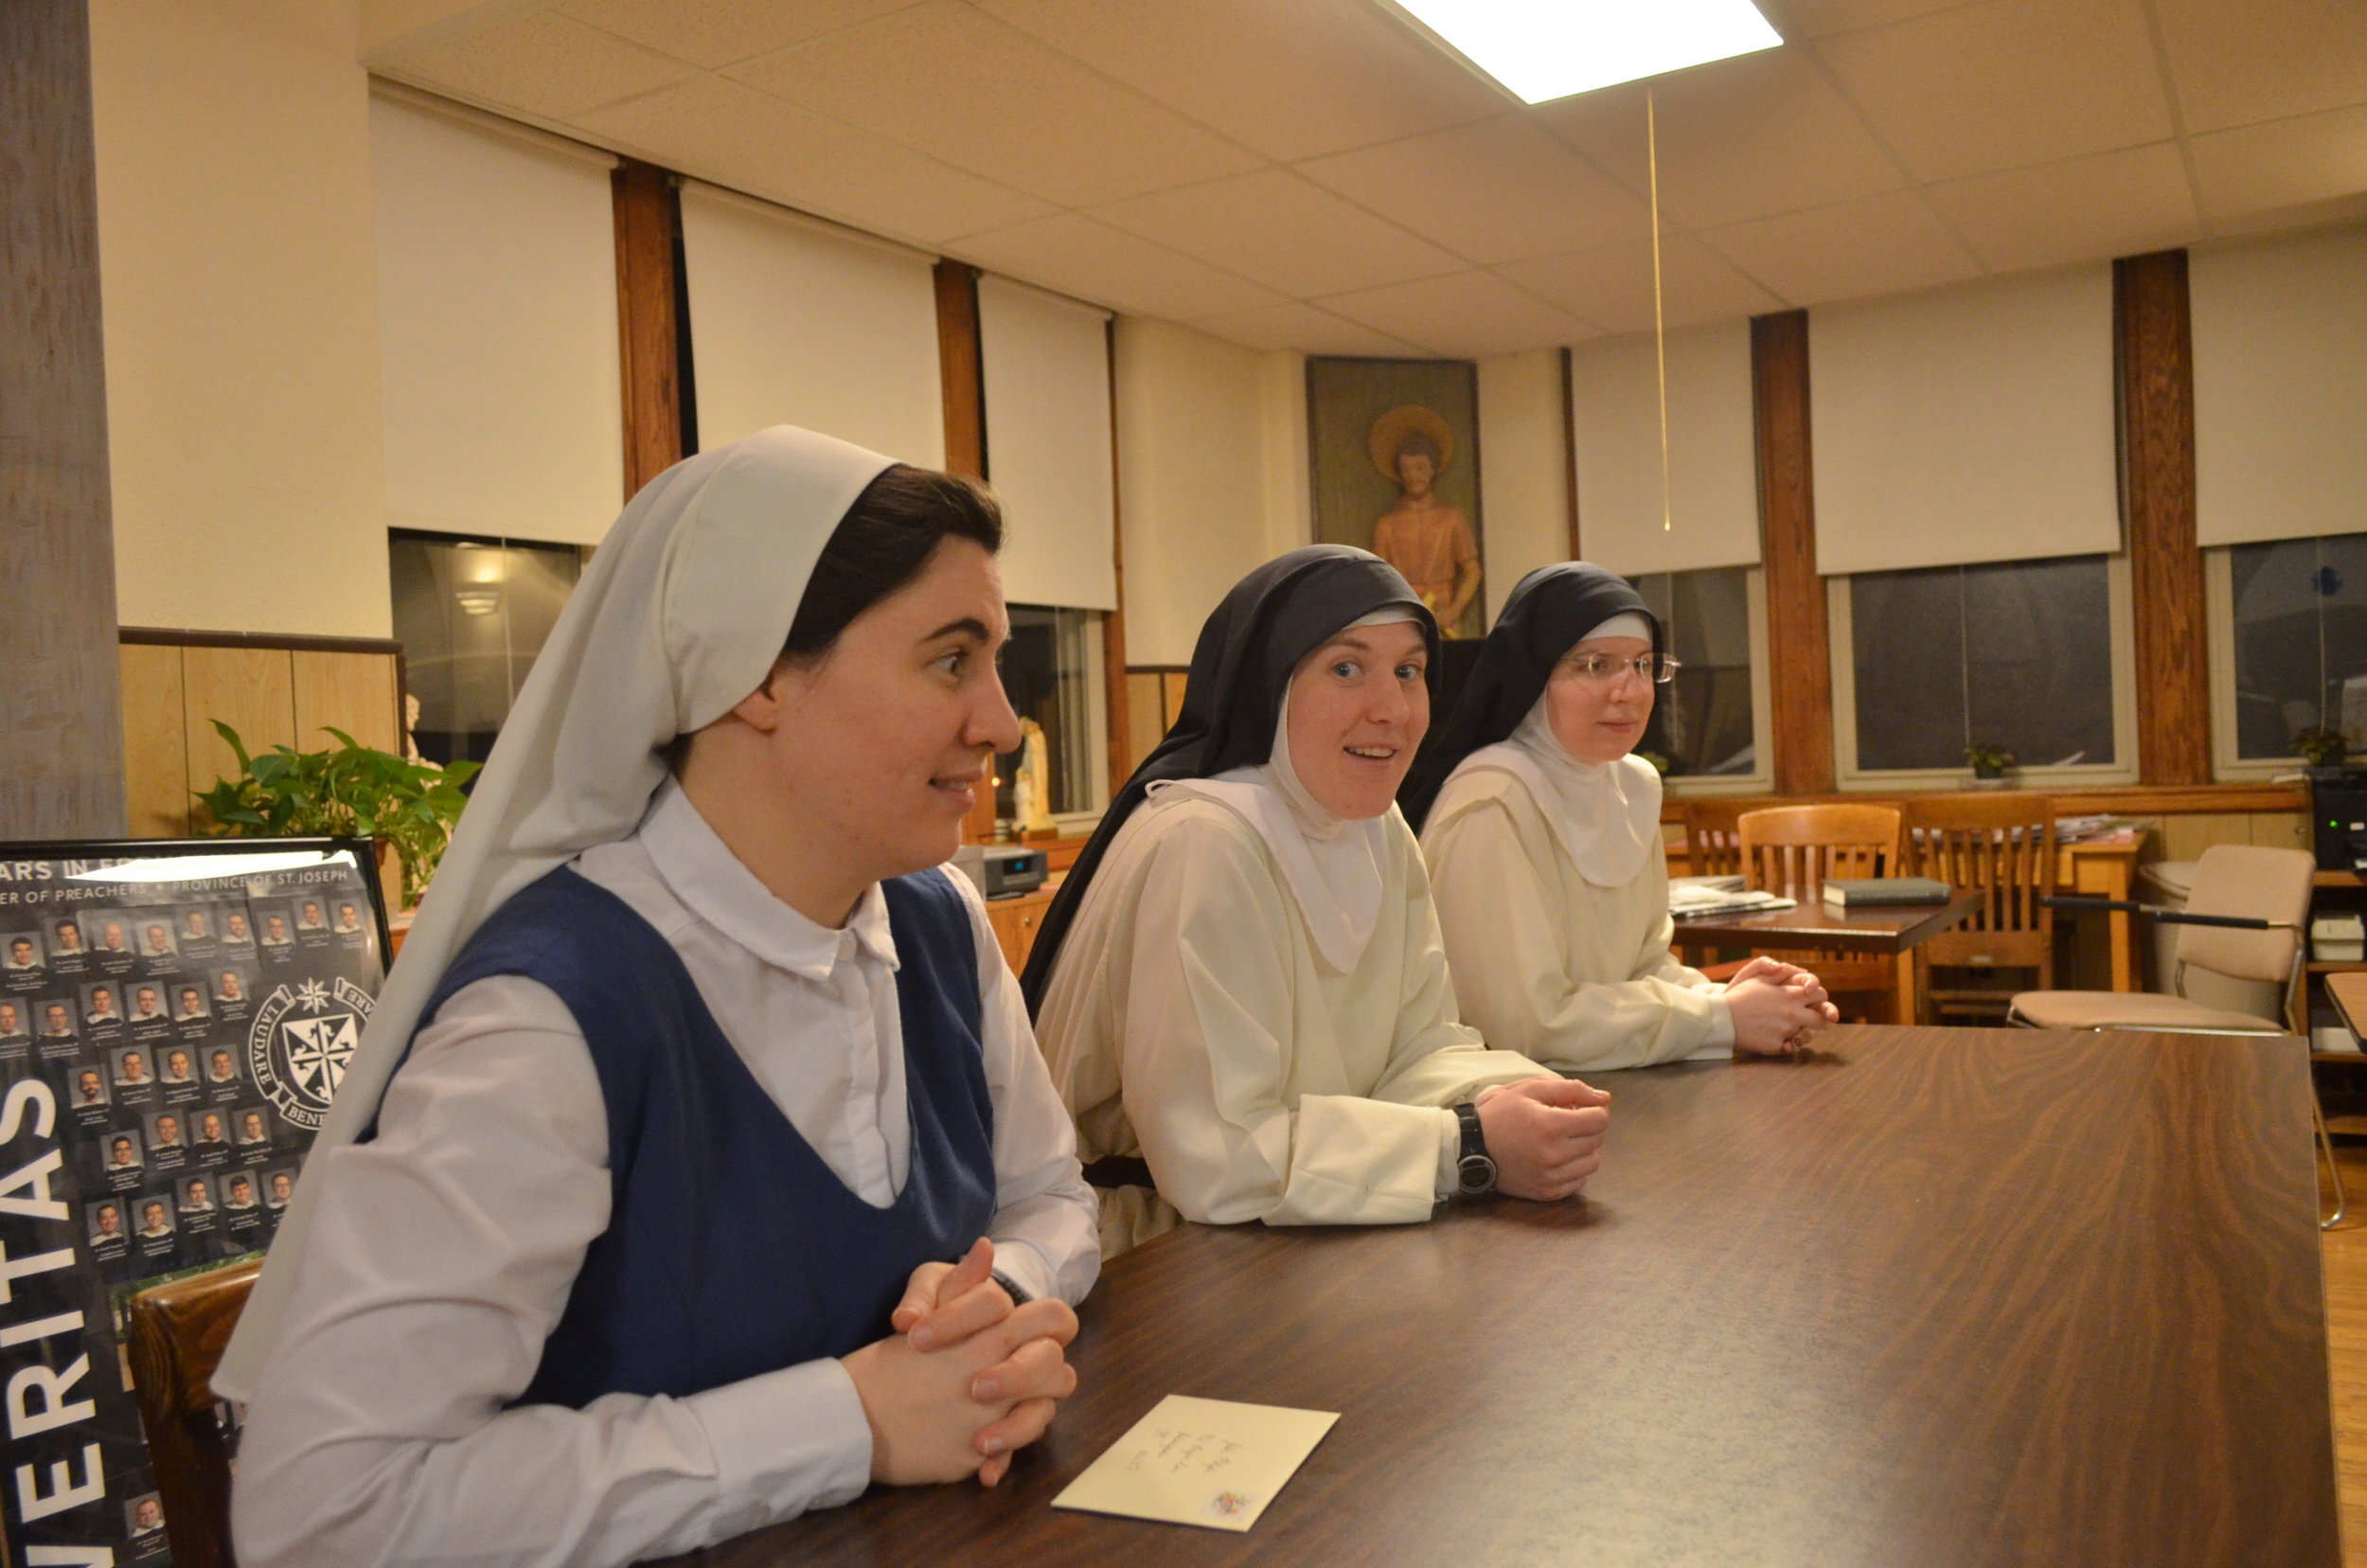 Sr. Lauren, Sr. Mary Magdalene, and Sr. Mary Veronica watch the unboxing